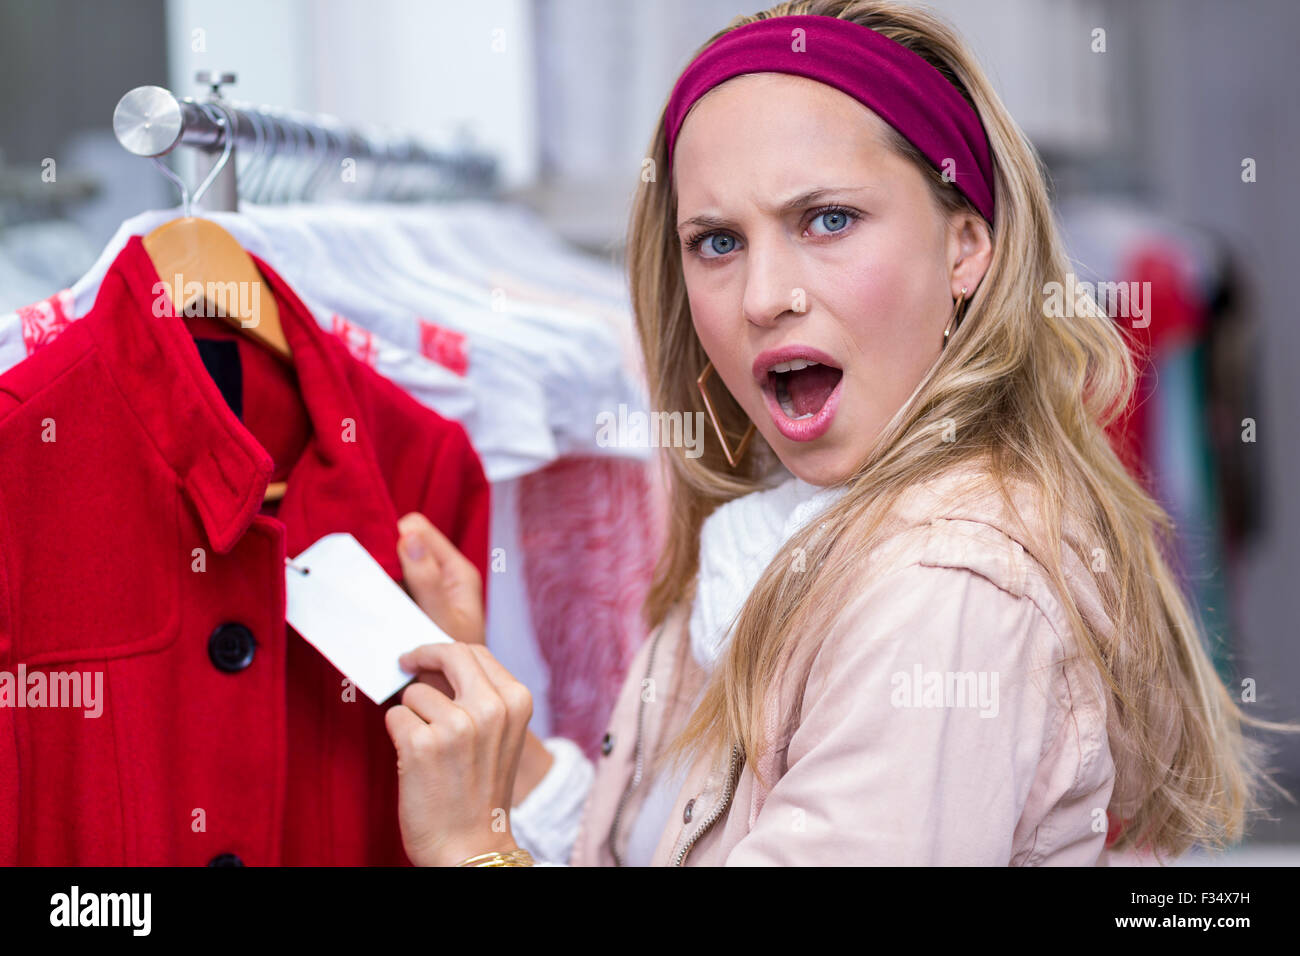 Shocked woman showing price tag to camera Stock Photo